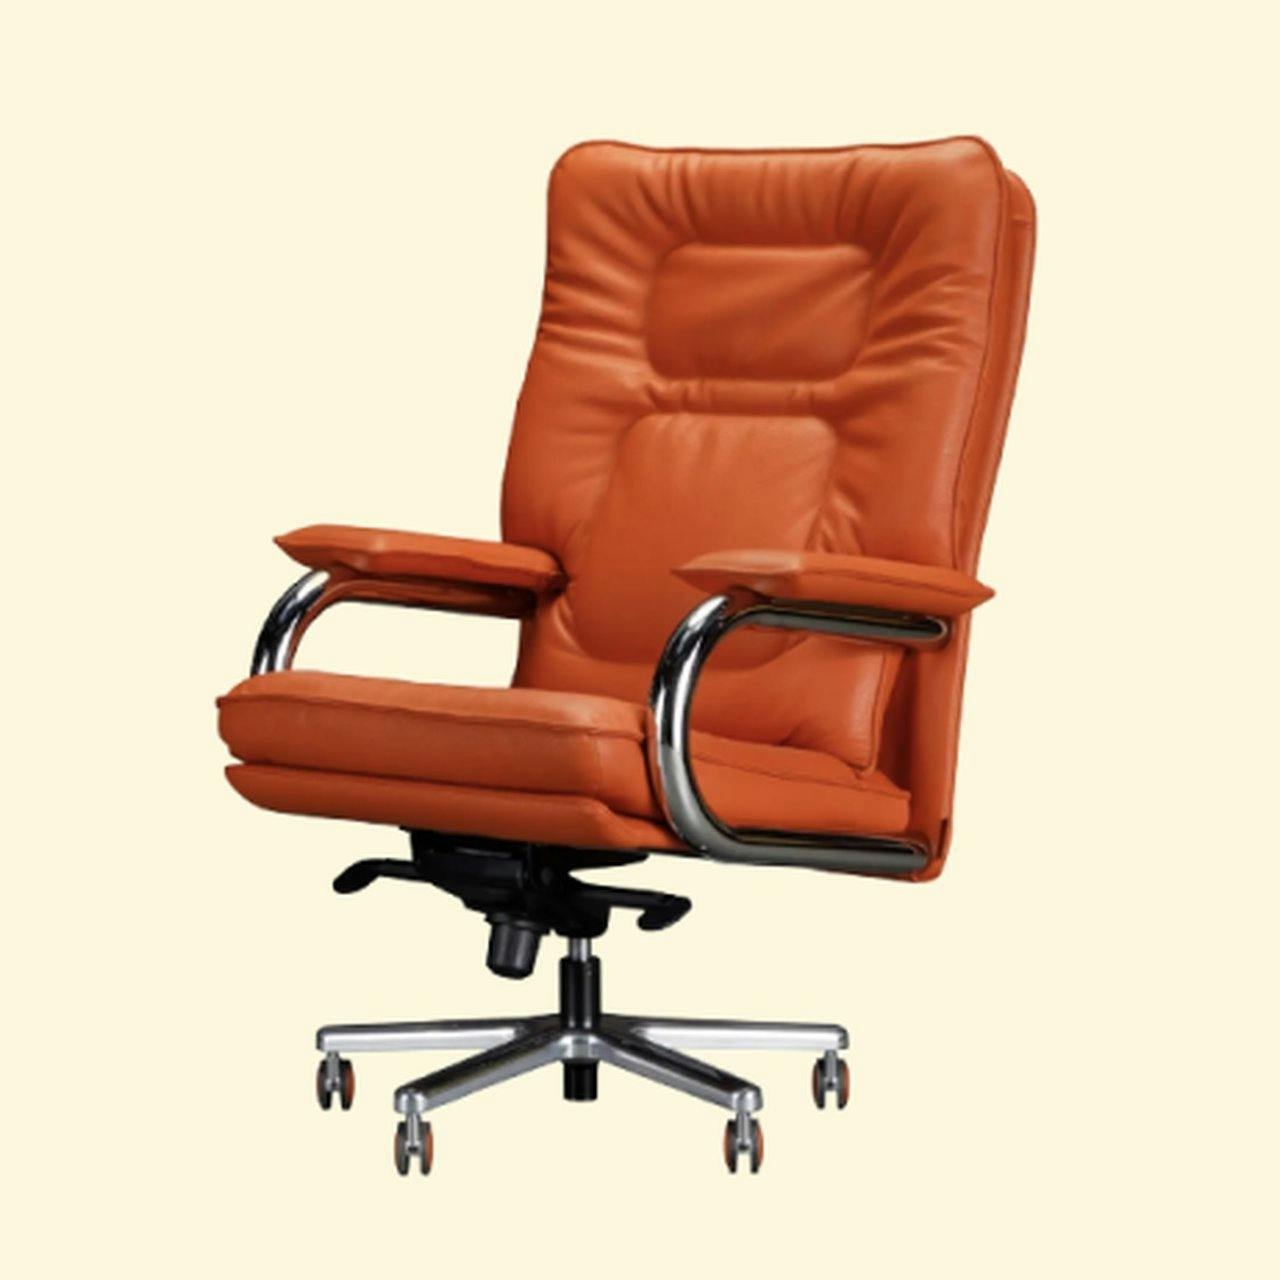 Sitland Office chairs